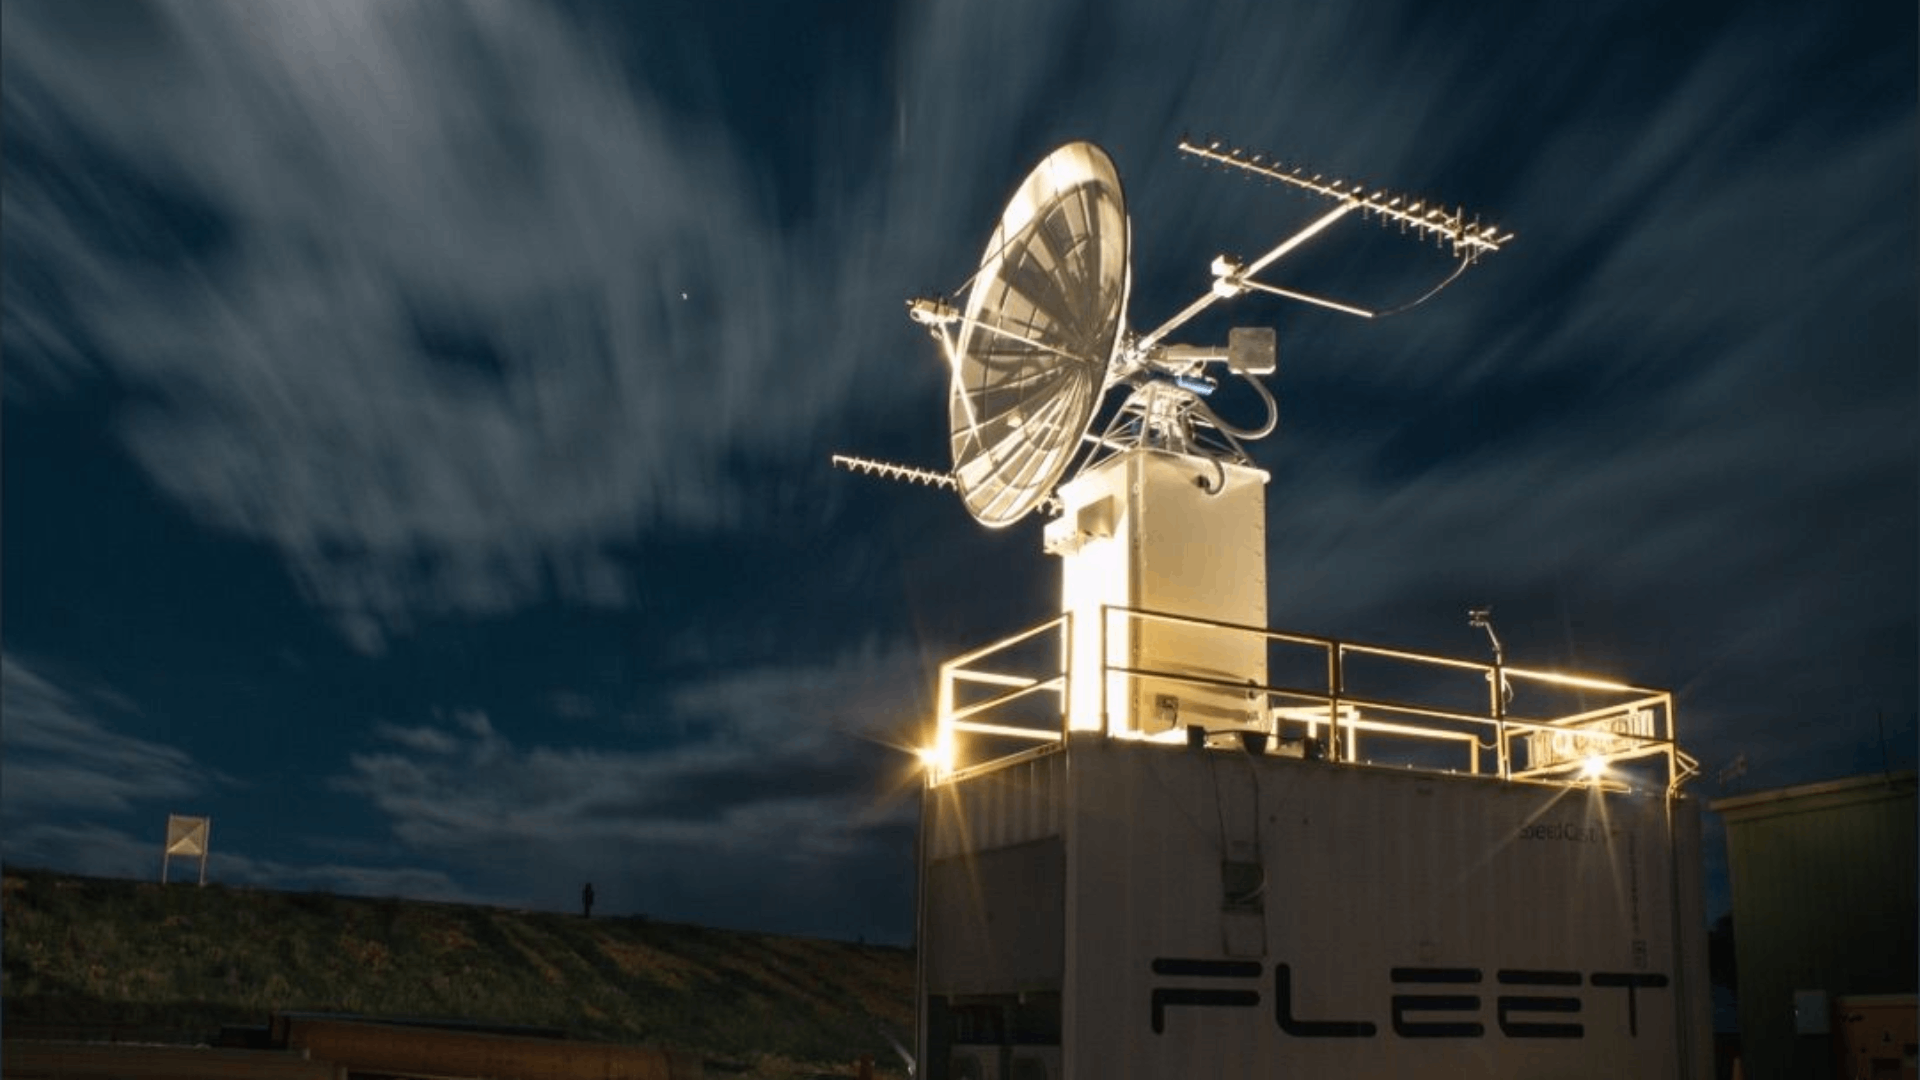 Fleet Space Technologies: Connecting Earth, Moon, and Mars